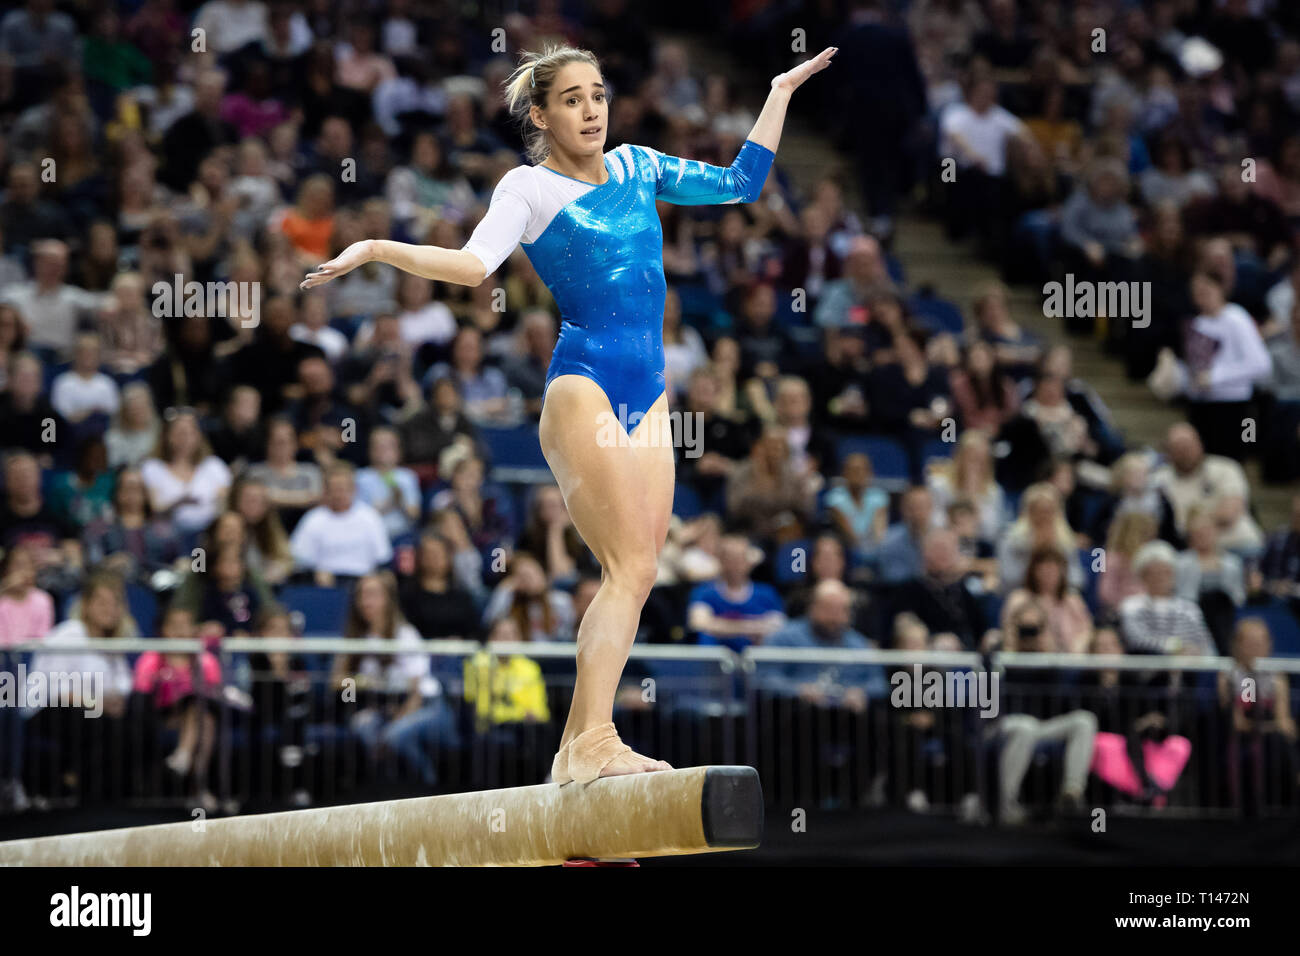 London, UK. 23rd March, 2019. Ayelen Tarabini of Argentina performs on the Beam during the Matchroom Multisport presents the 2019 Superstars of Gymnastics at The O2 Arena on Saturday, 23 March 2019. LONDON ENGLAND. Credit: Taka G Wu/Alamy News Stock Photo